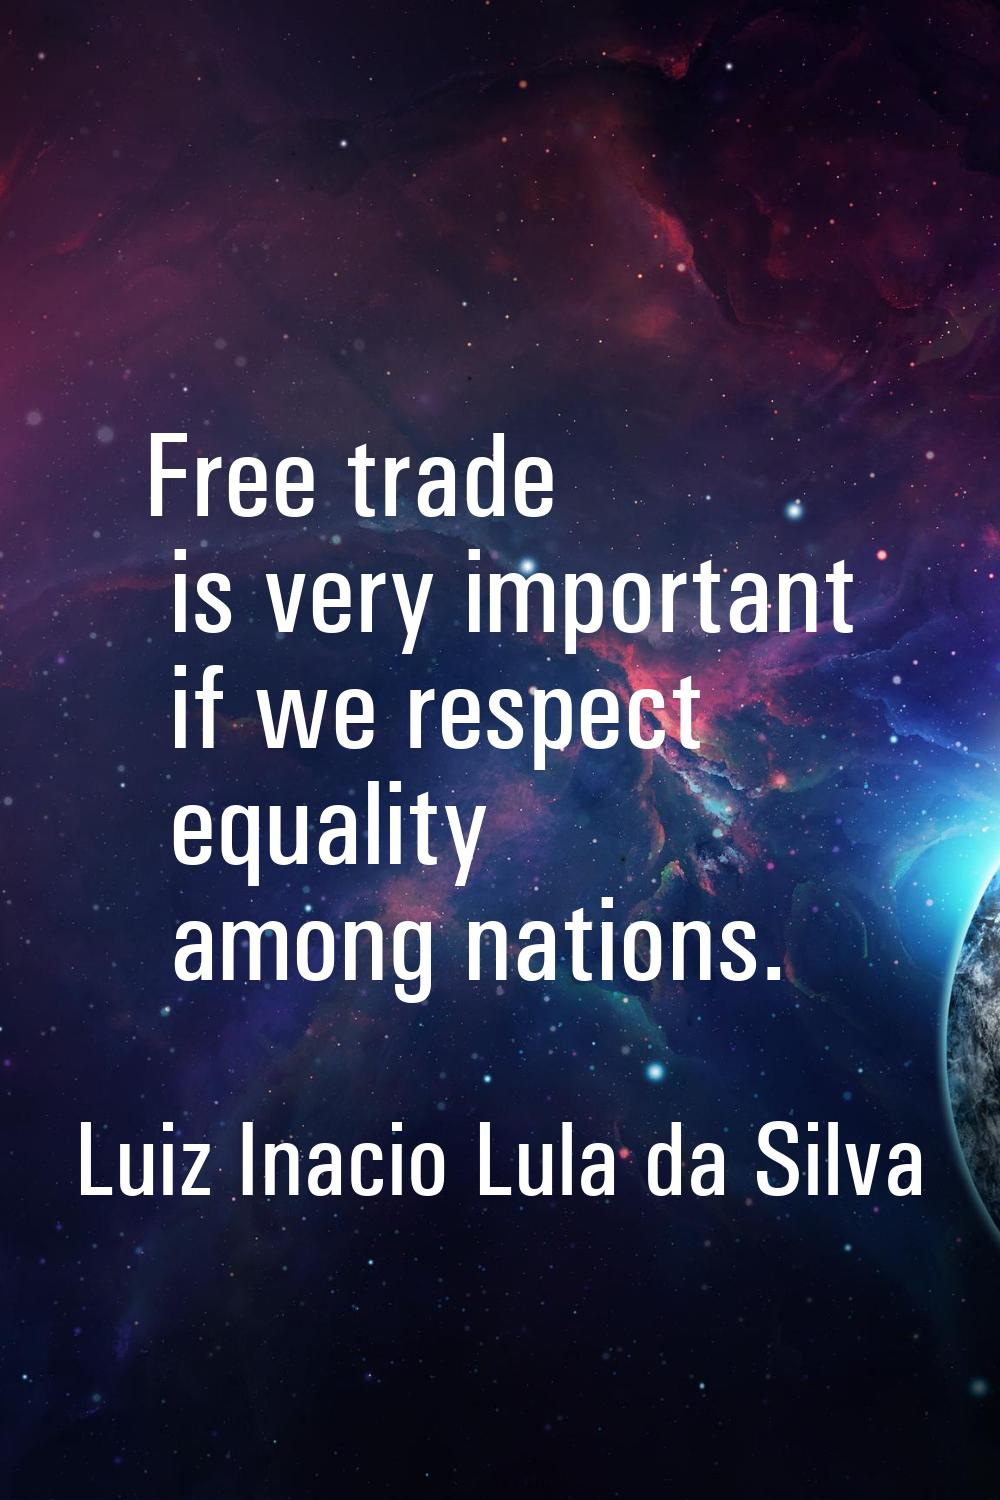 Free trade is very important if we respect equality among nations.